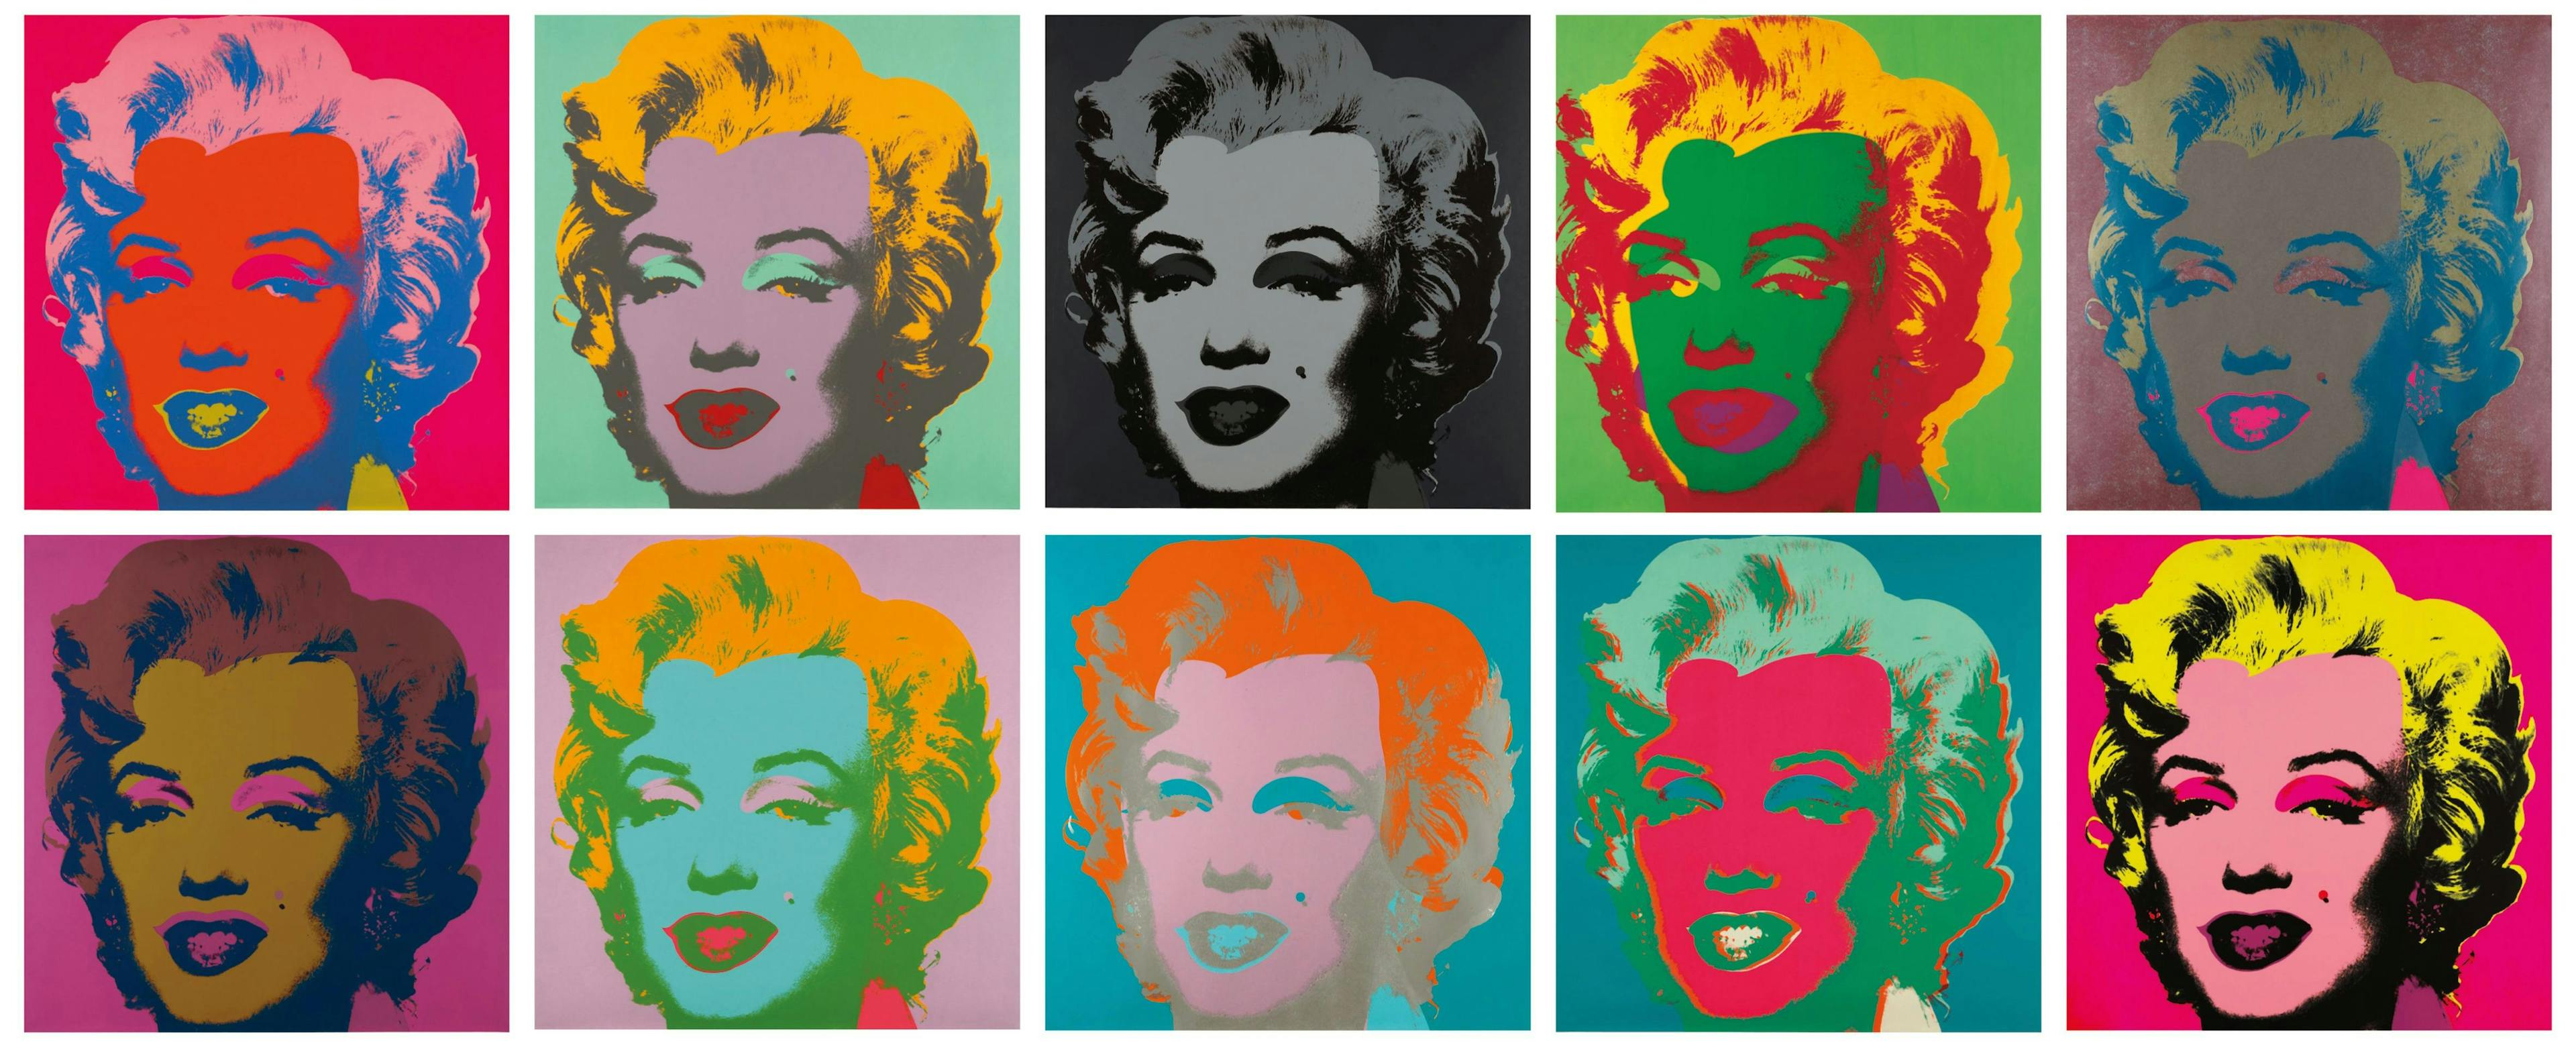 marilyn monroe; icon; iconic; female; portrait; series; pop art; 1960s; 60s; sixties; actress; beauty; glamour; glamorous; style; hollywood; cinema; movie star; celebrity; fame; famous; movies; film star; bright; bold; colourful; set; series collage poster advertisement label text head